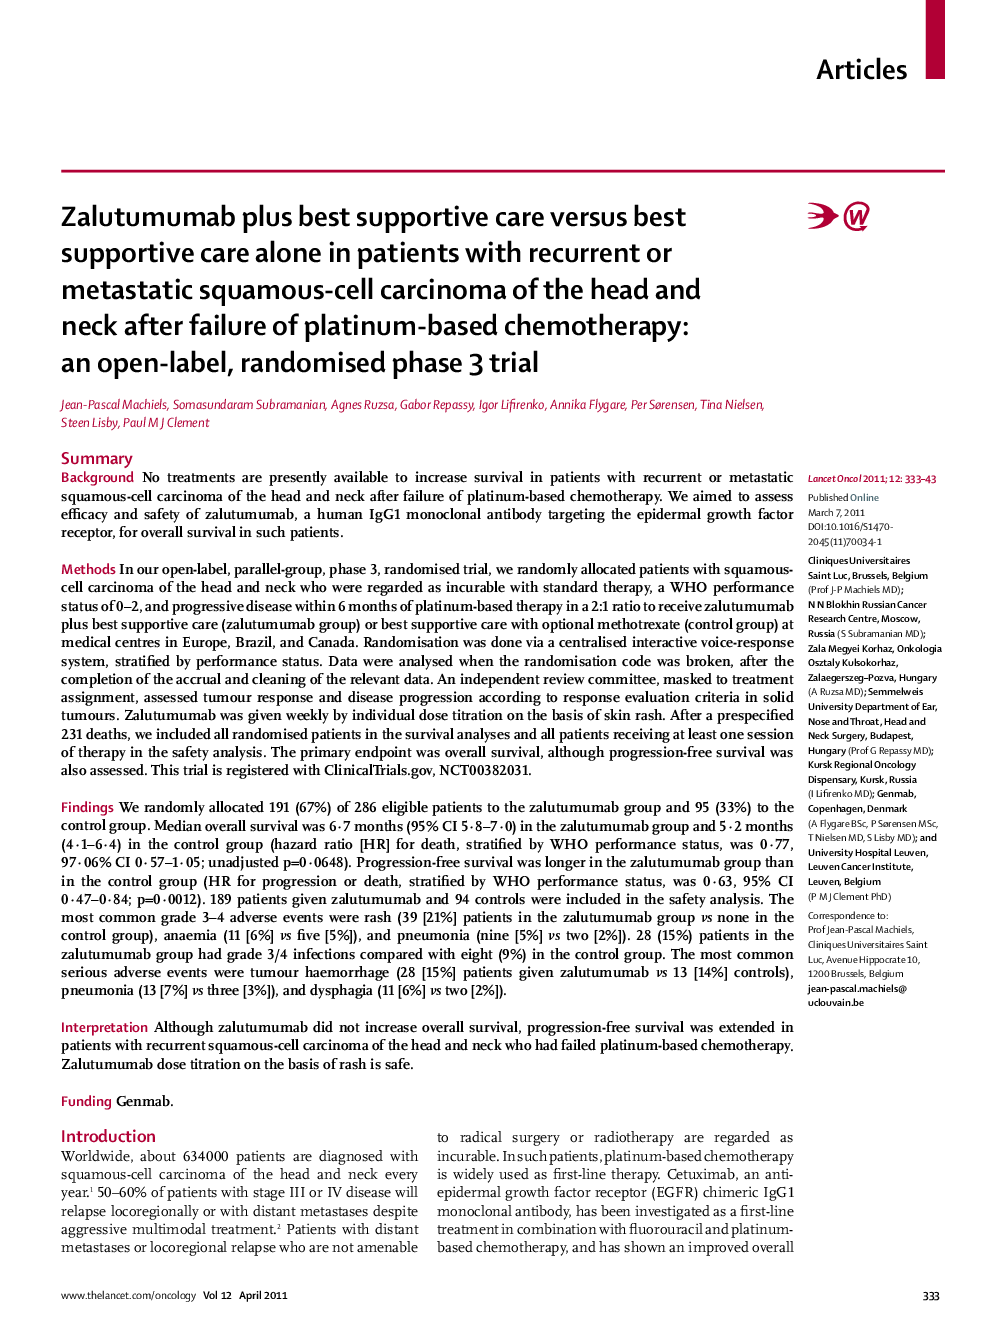 Zalutumumab plus best supportive care versus best supportive care alone in patients with recurrent or metastatic squamous-cell carcinoma of the head and neck after failure of platinum-based chemotherapy: an open-label, randomised phase 3 trial